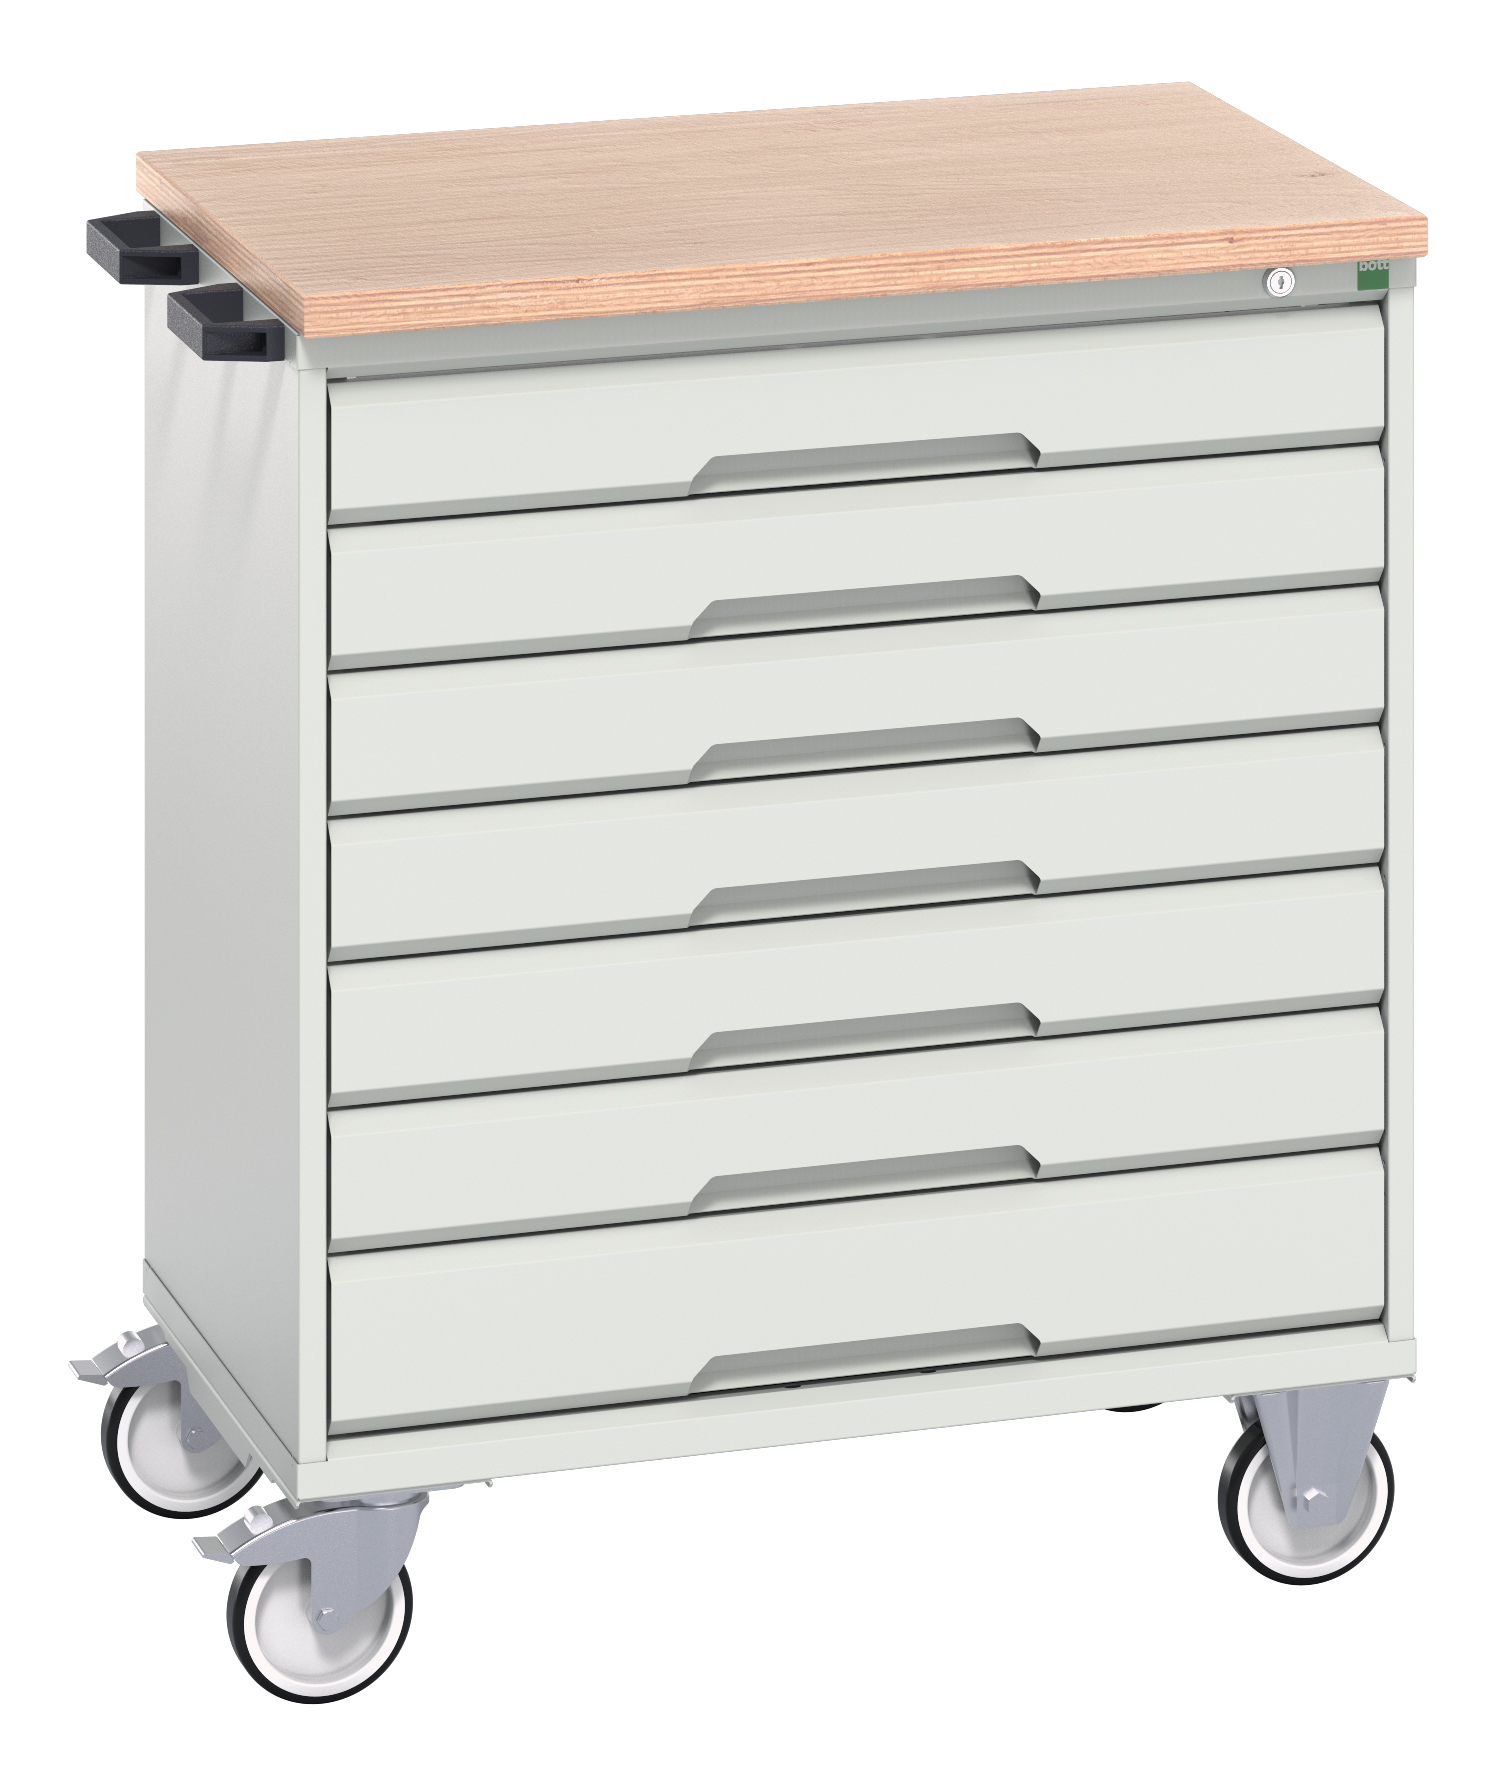 Bott Verso Mobile Drawer Cabinet With 7 Drawers & Multiplex Top - 16927007.16